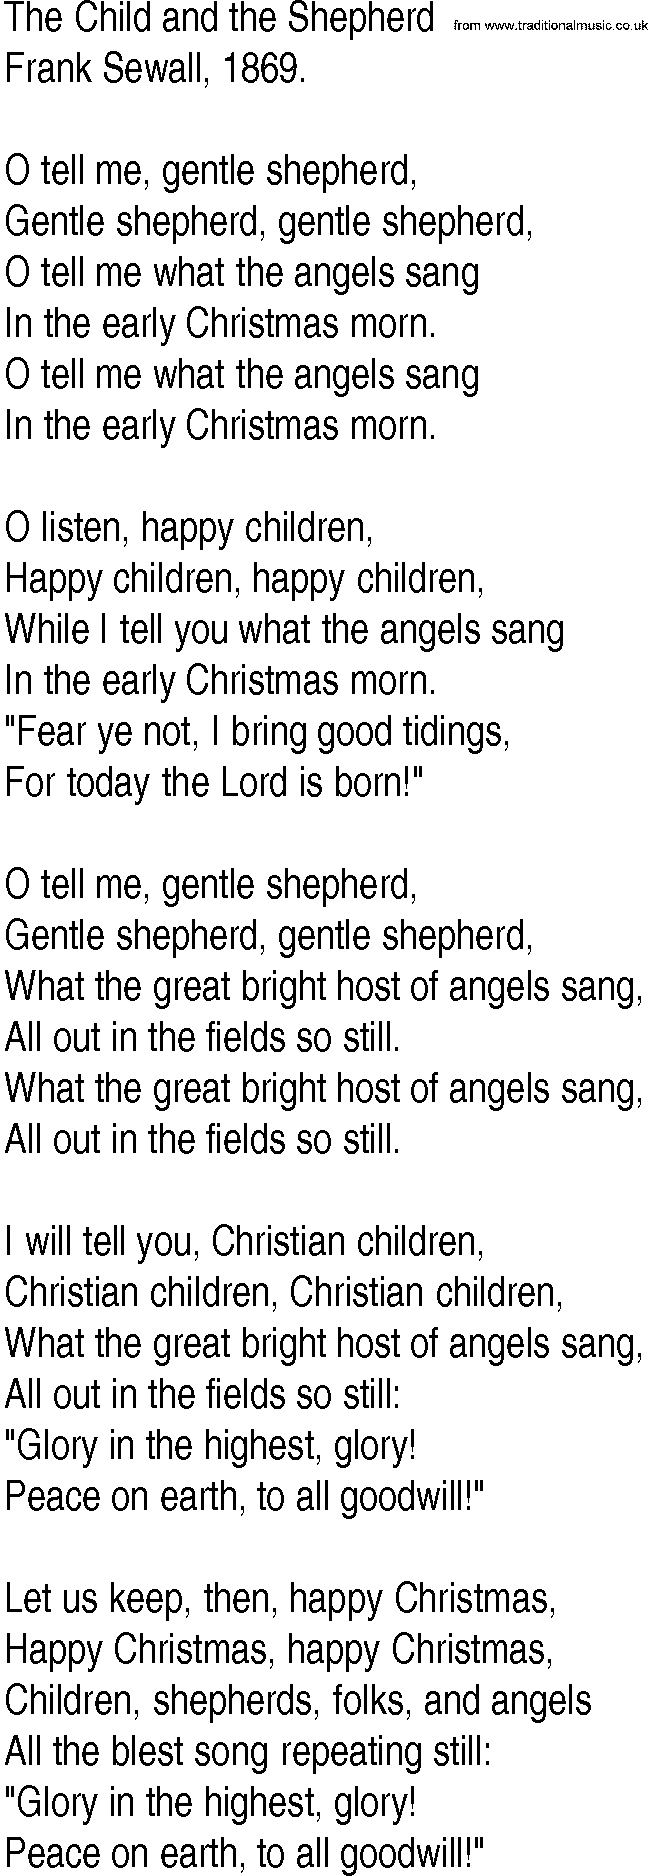 Hymn and Gospel Song: The Child and the Shepherd by Frank Sewall lyrics